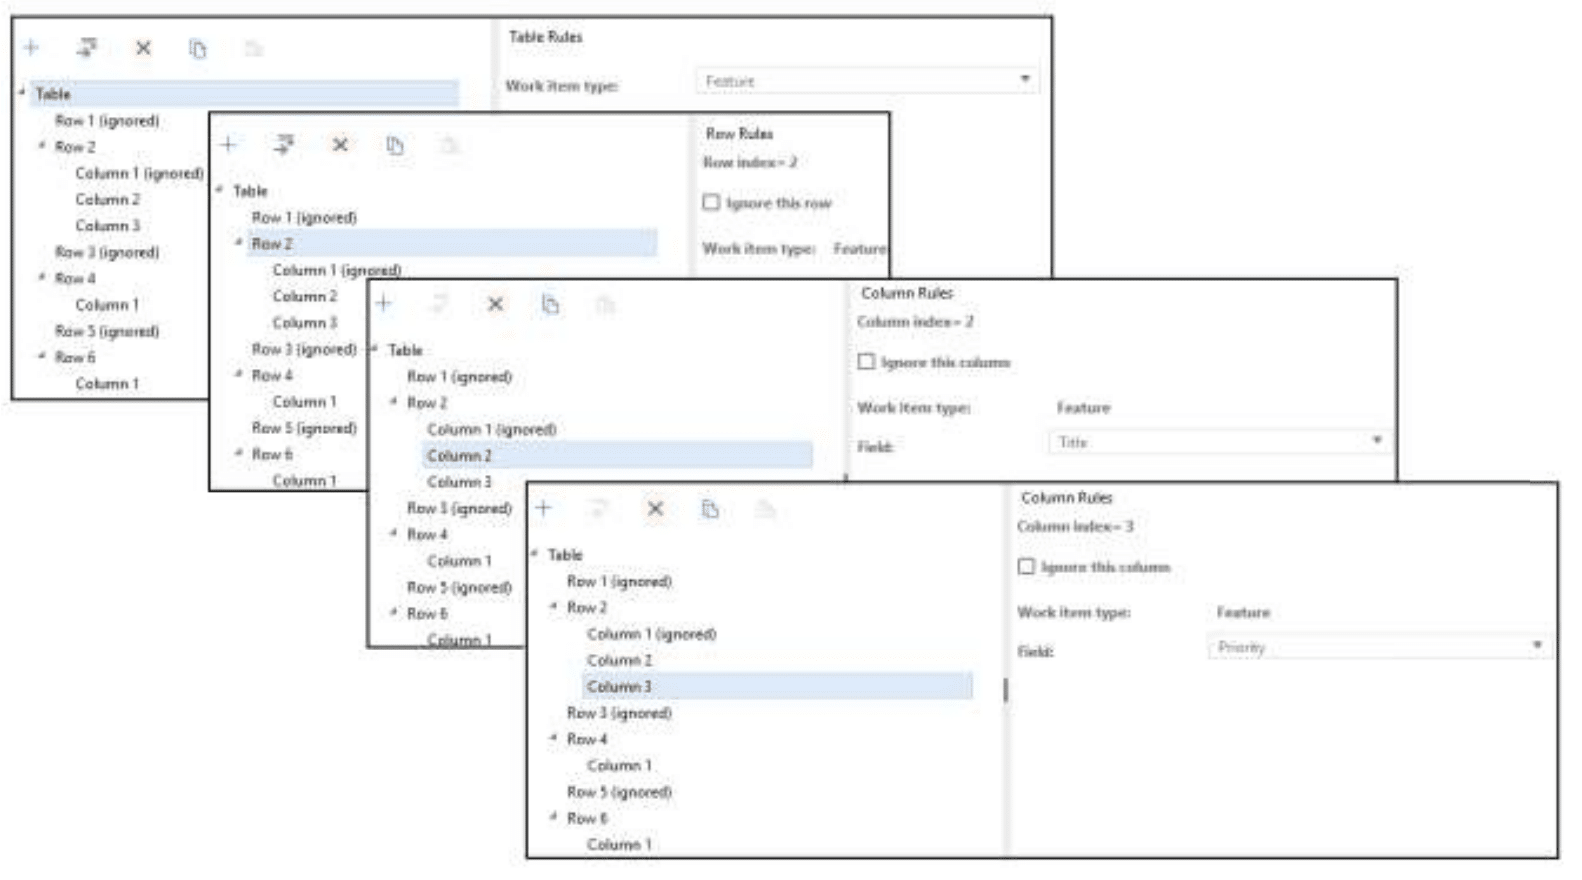 EXAMPLE OF MAPPING CONFIGURATION FROM RULESET DESIGNER